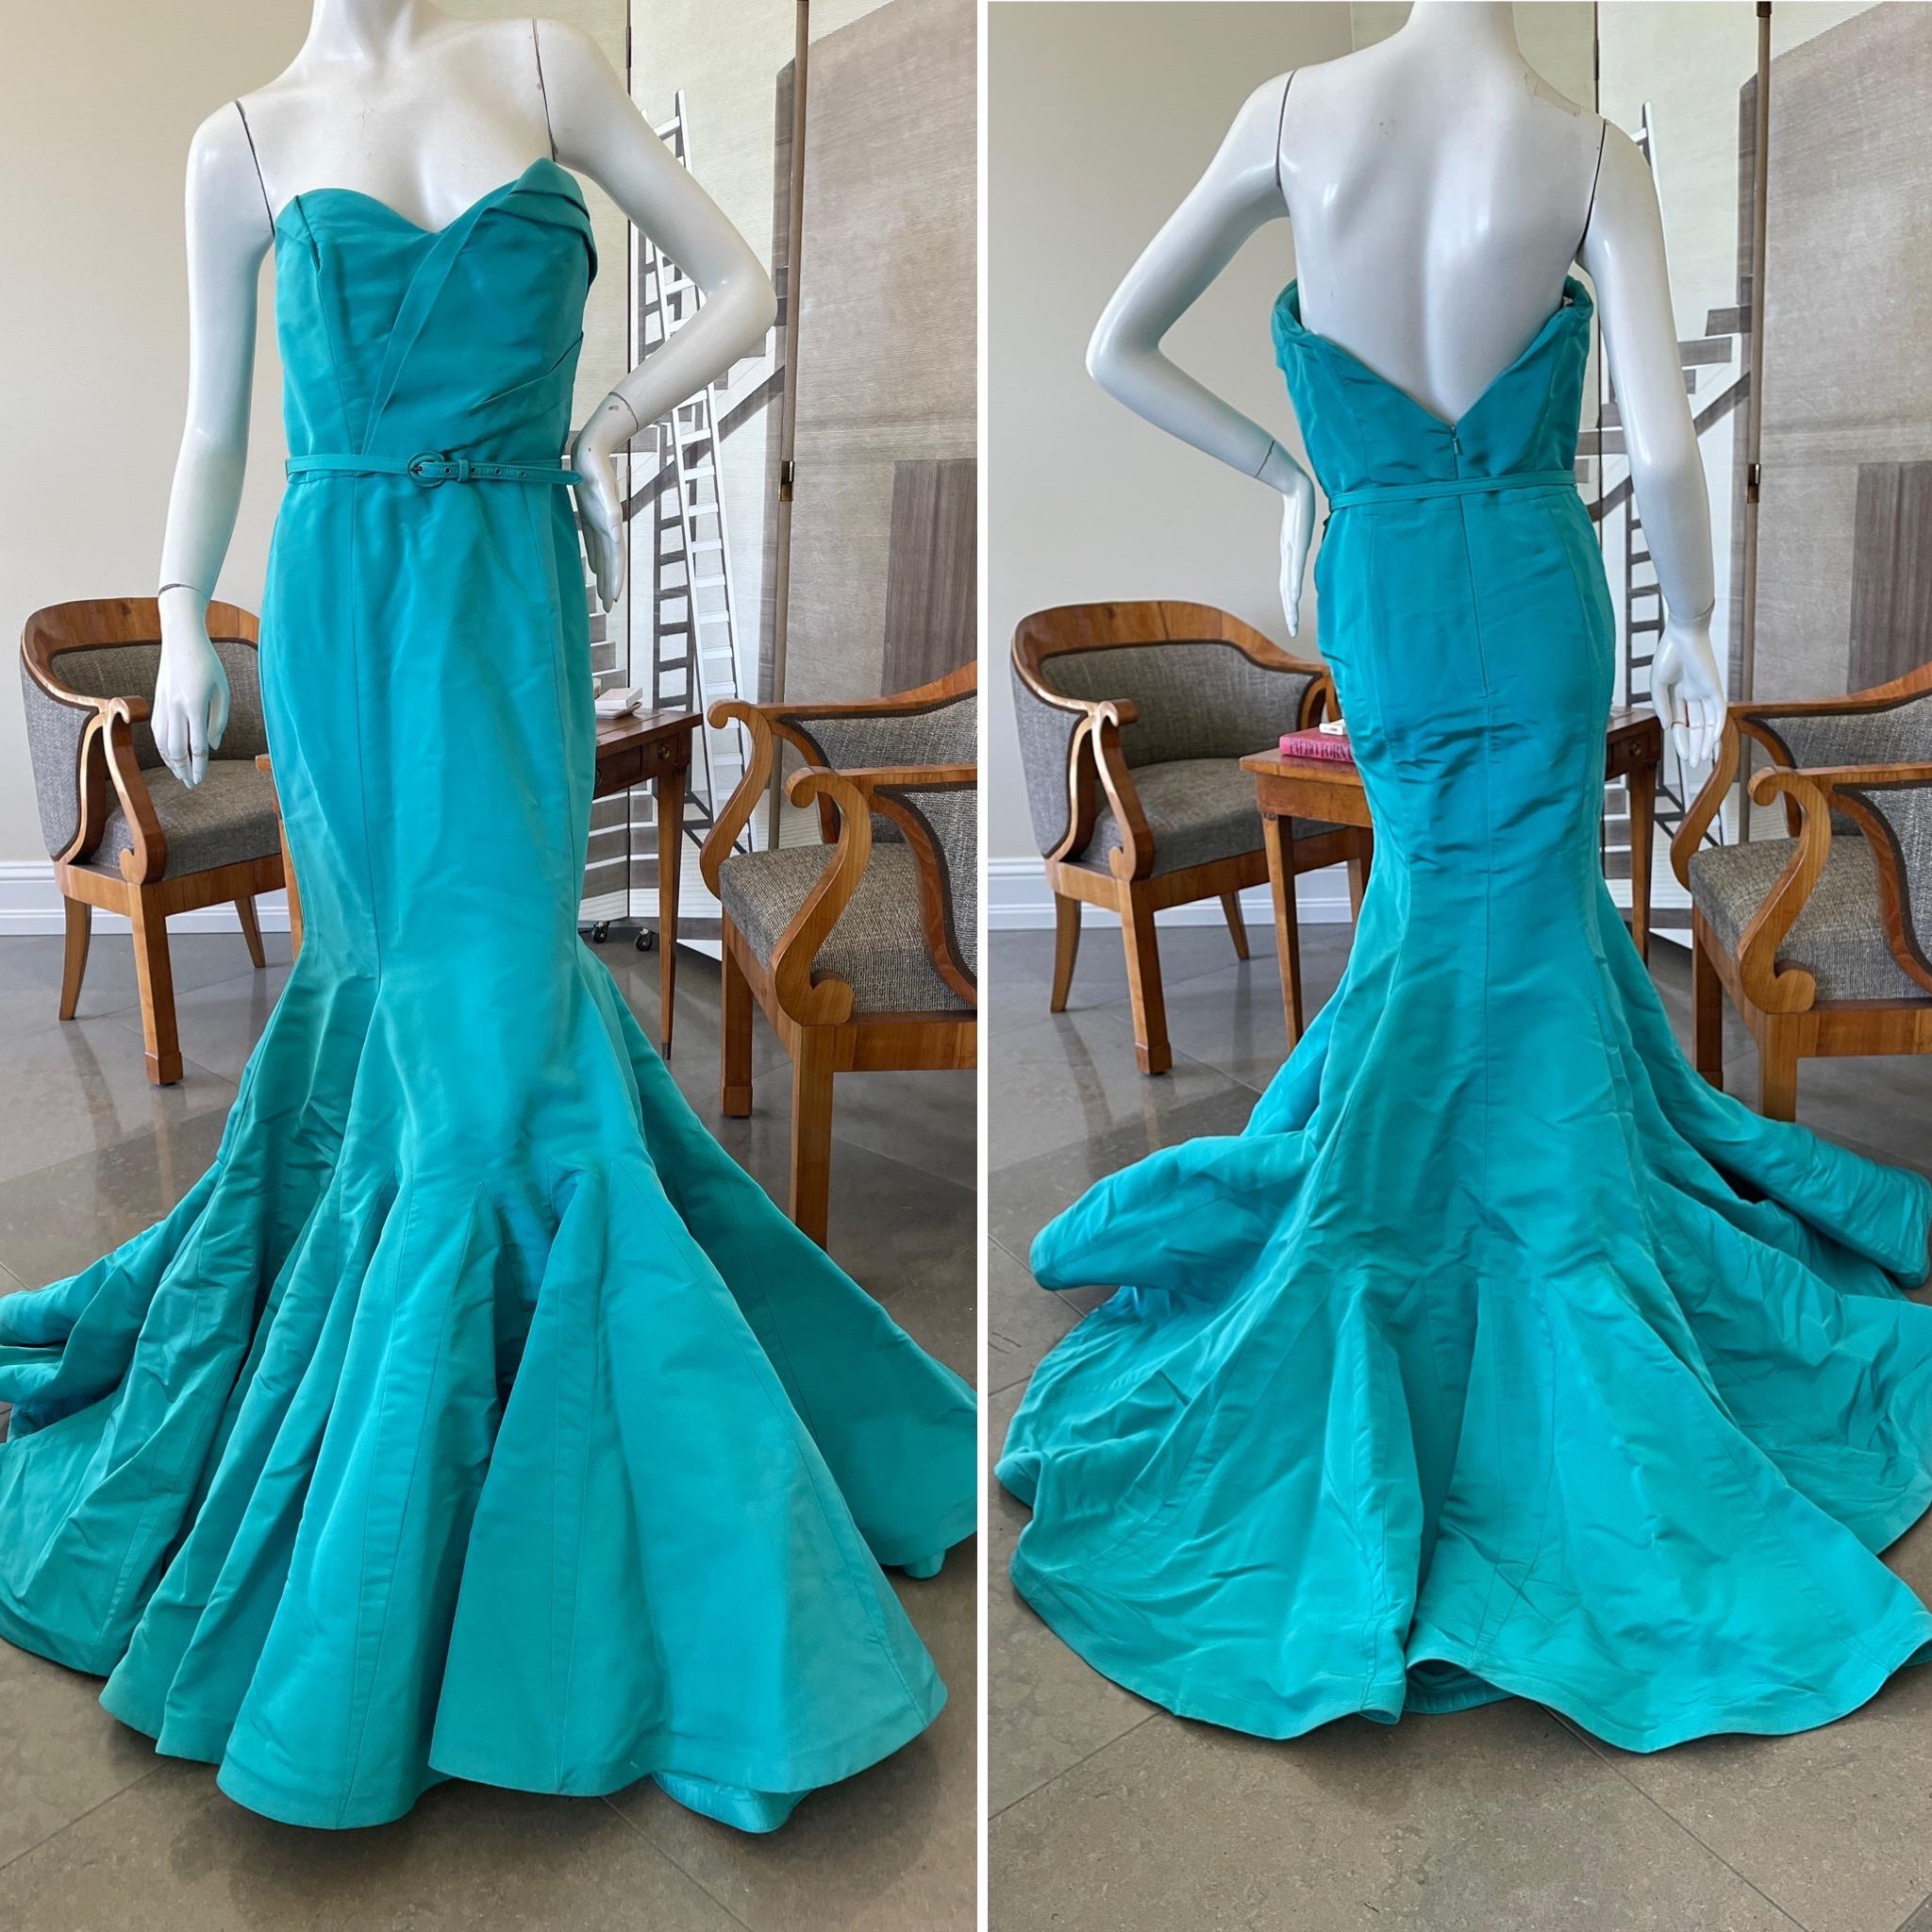 Oscar de la Renta Strapless Vintage Robin's Egg Blue Silk Taffeta Mermaid Dress with Belt 
  Stunning. Please use the zoom feature to see all the remarkable details.
 Size 8
Bust 38